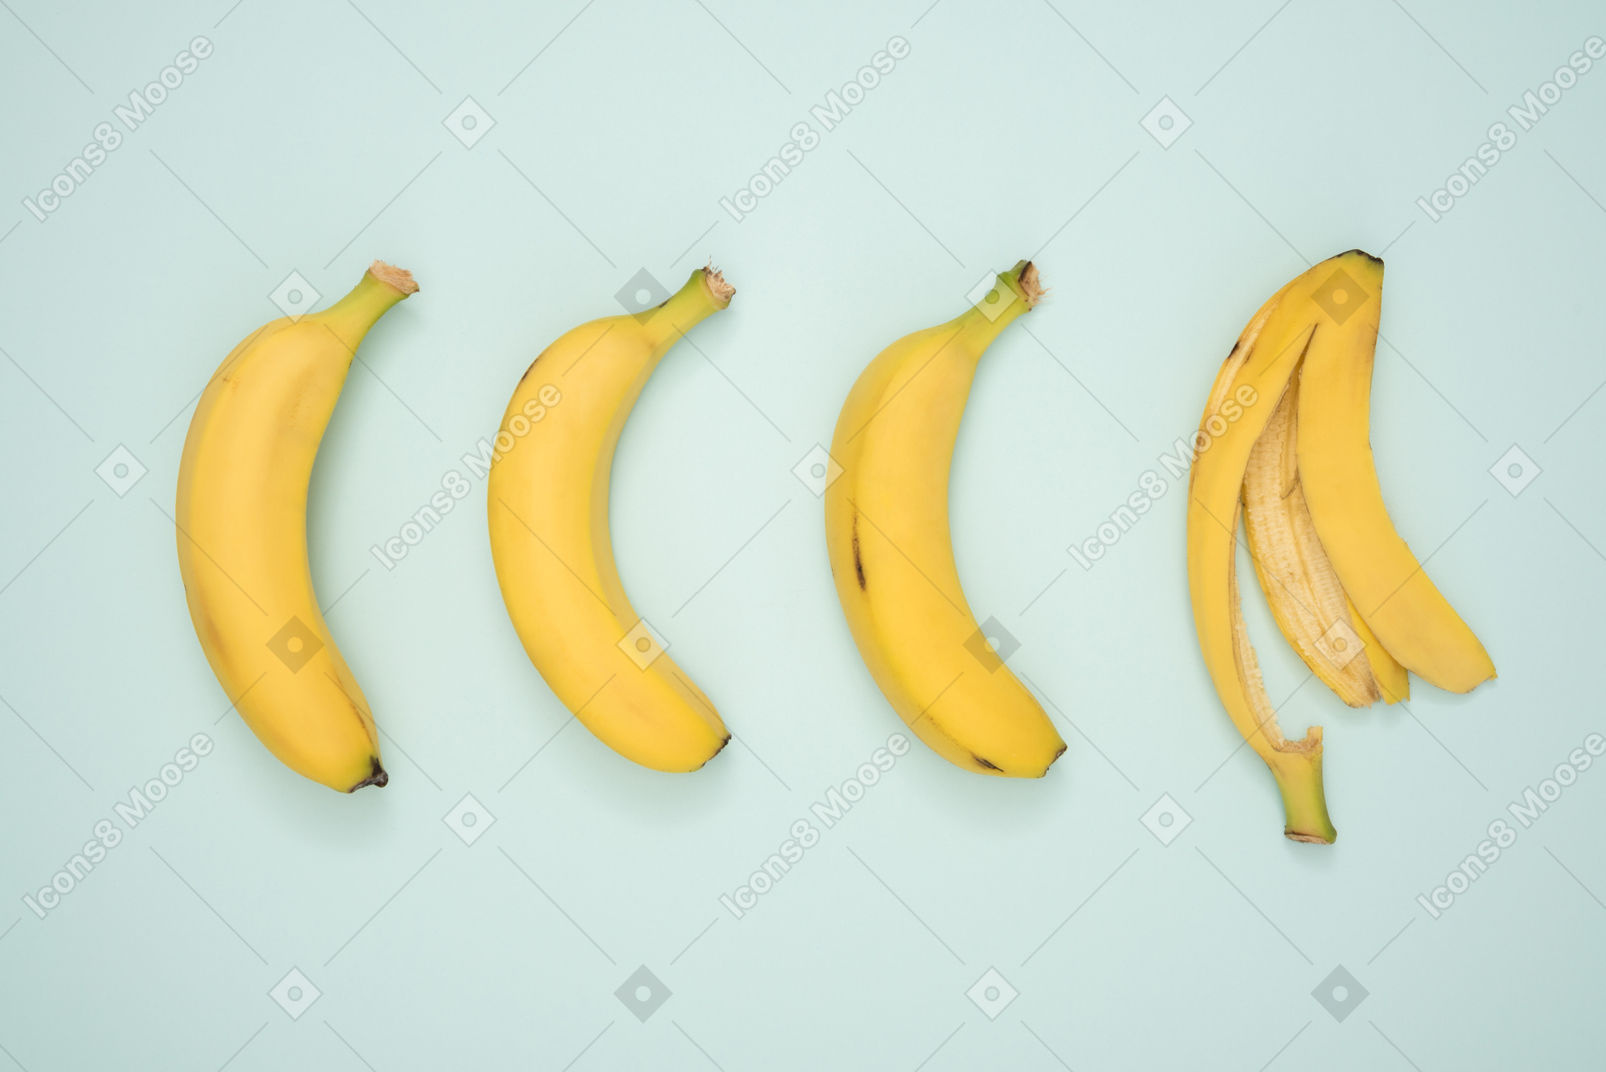 There's a potential banana skin in every venture